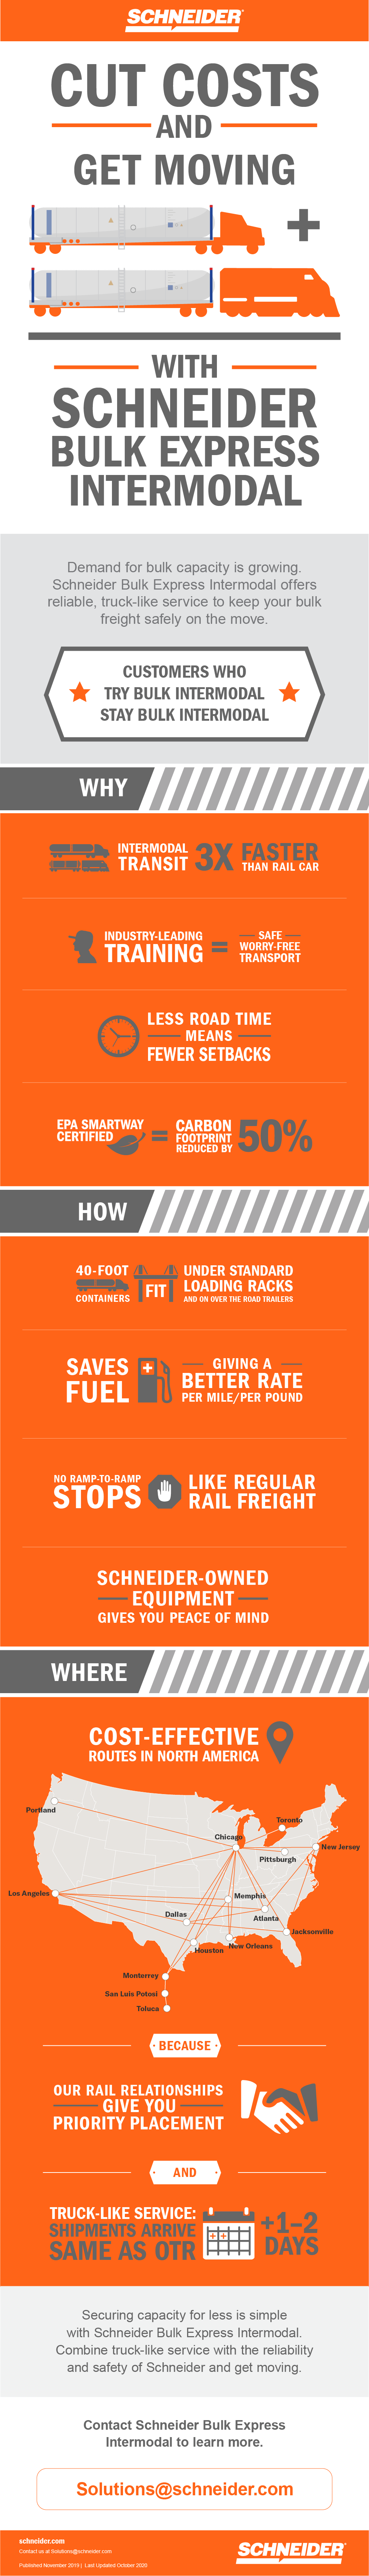 Infographic: Cut costs & get moving with Schneider Bulk Express Intermodal